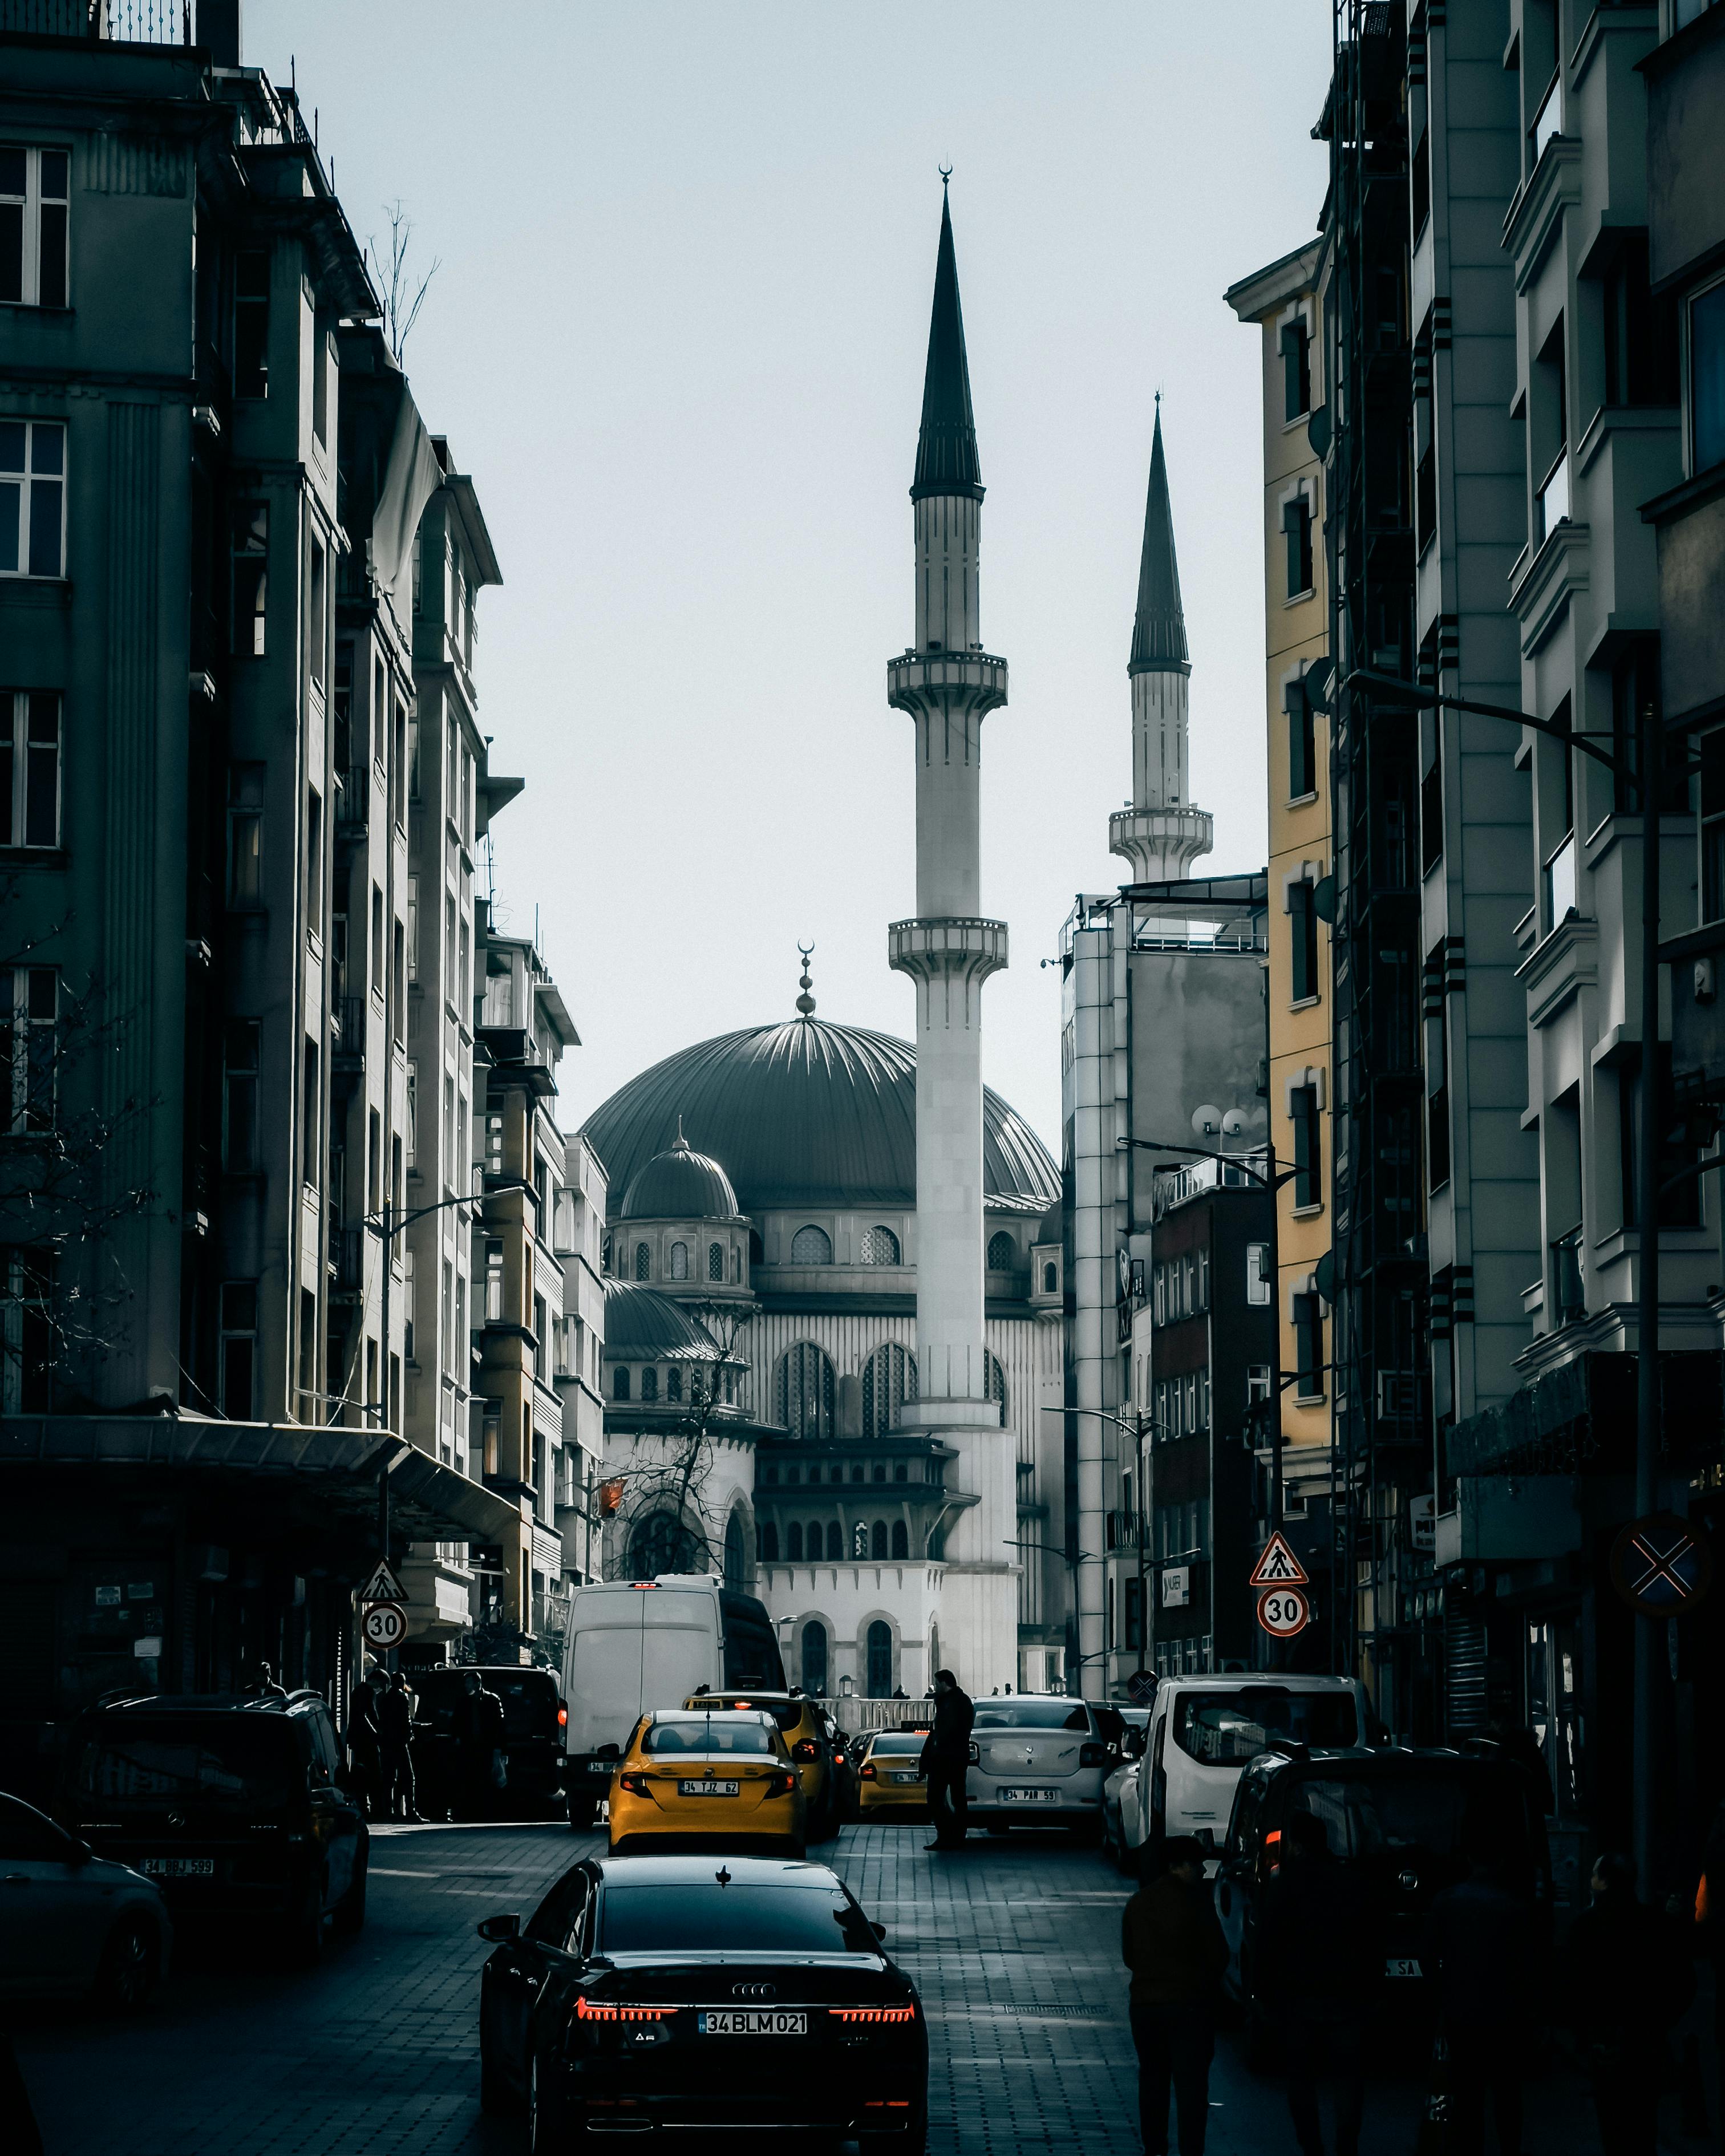 a view of the taksim mosque from a street